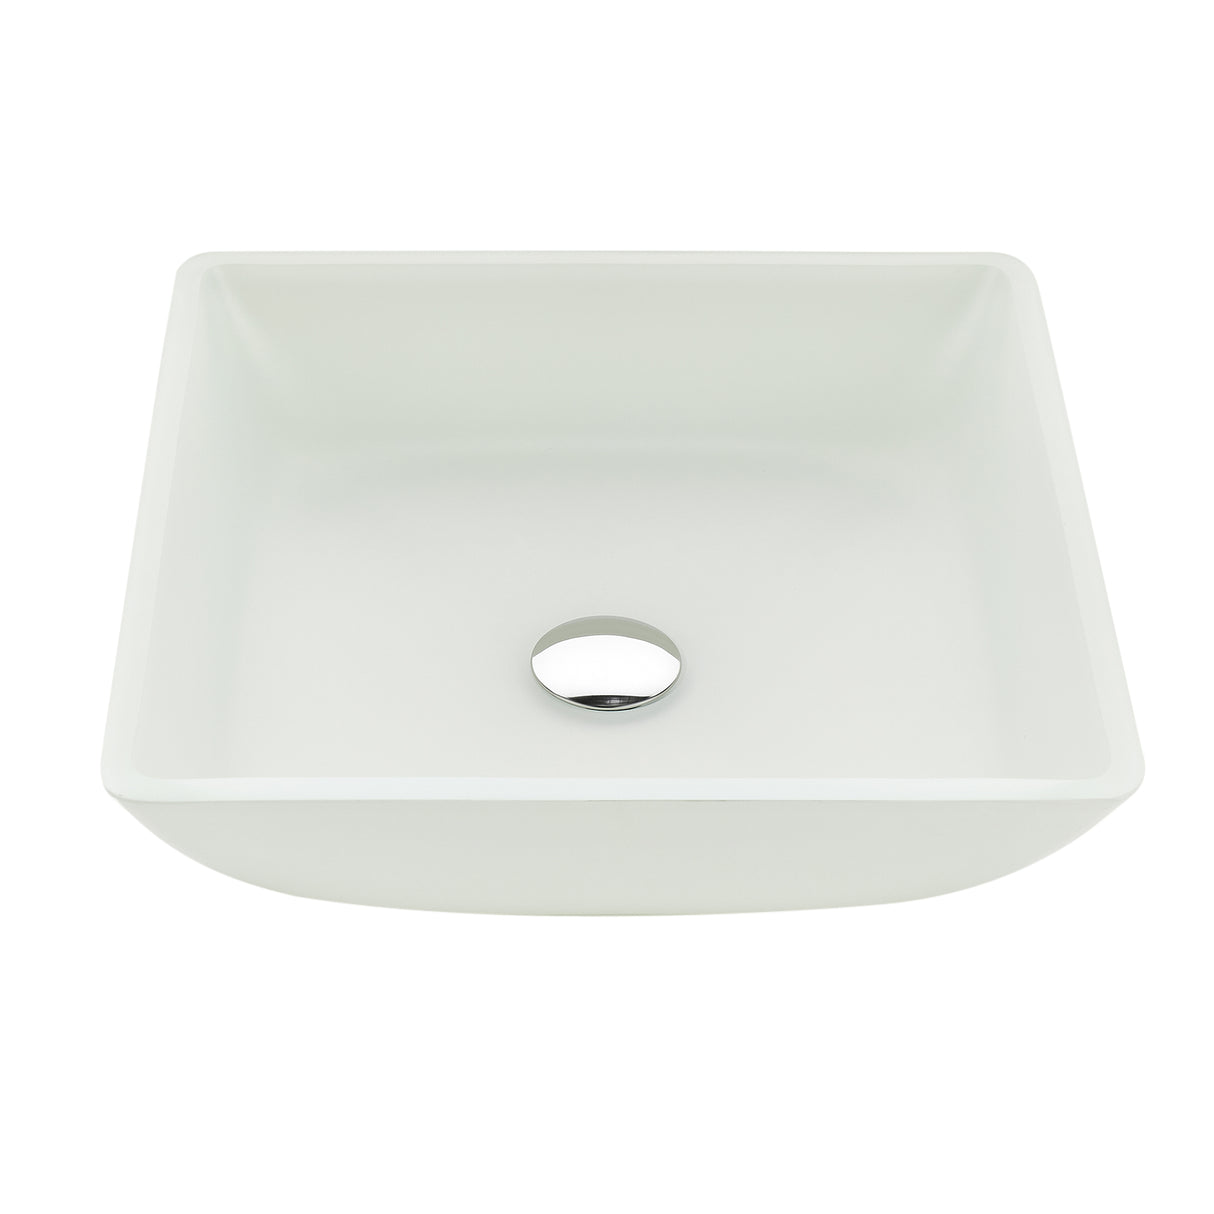 ANZZI LS-AZ912 Solstice Square Glass Vessel Bathroom Sink with White Finish